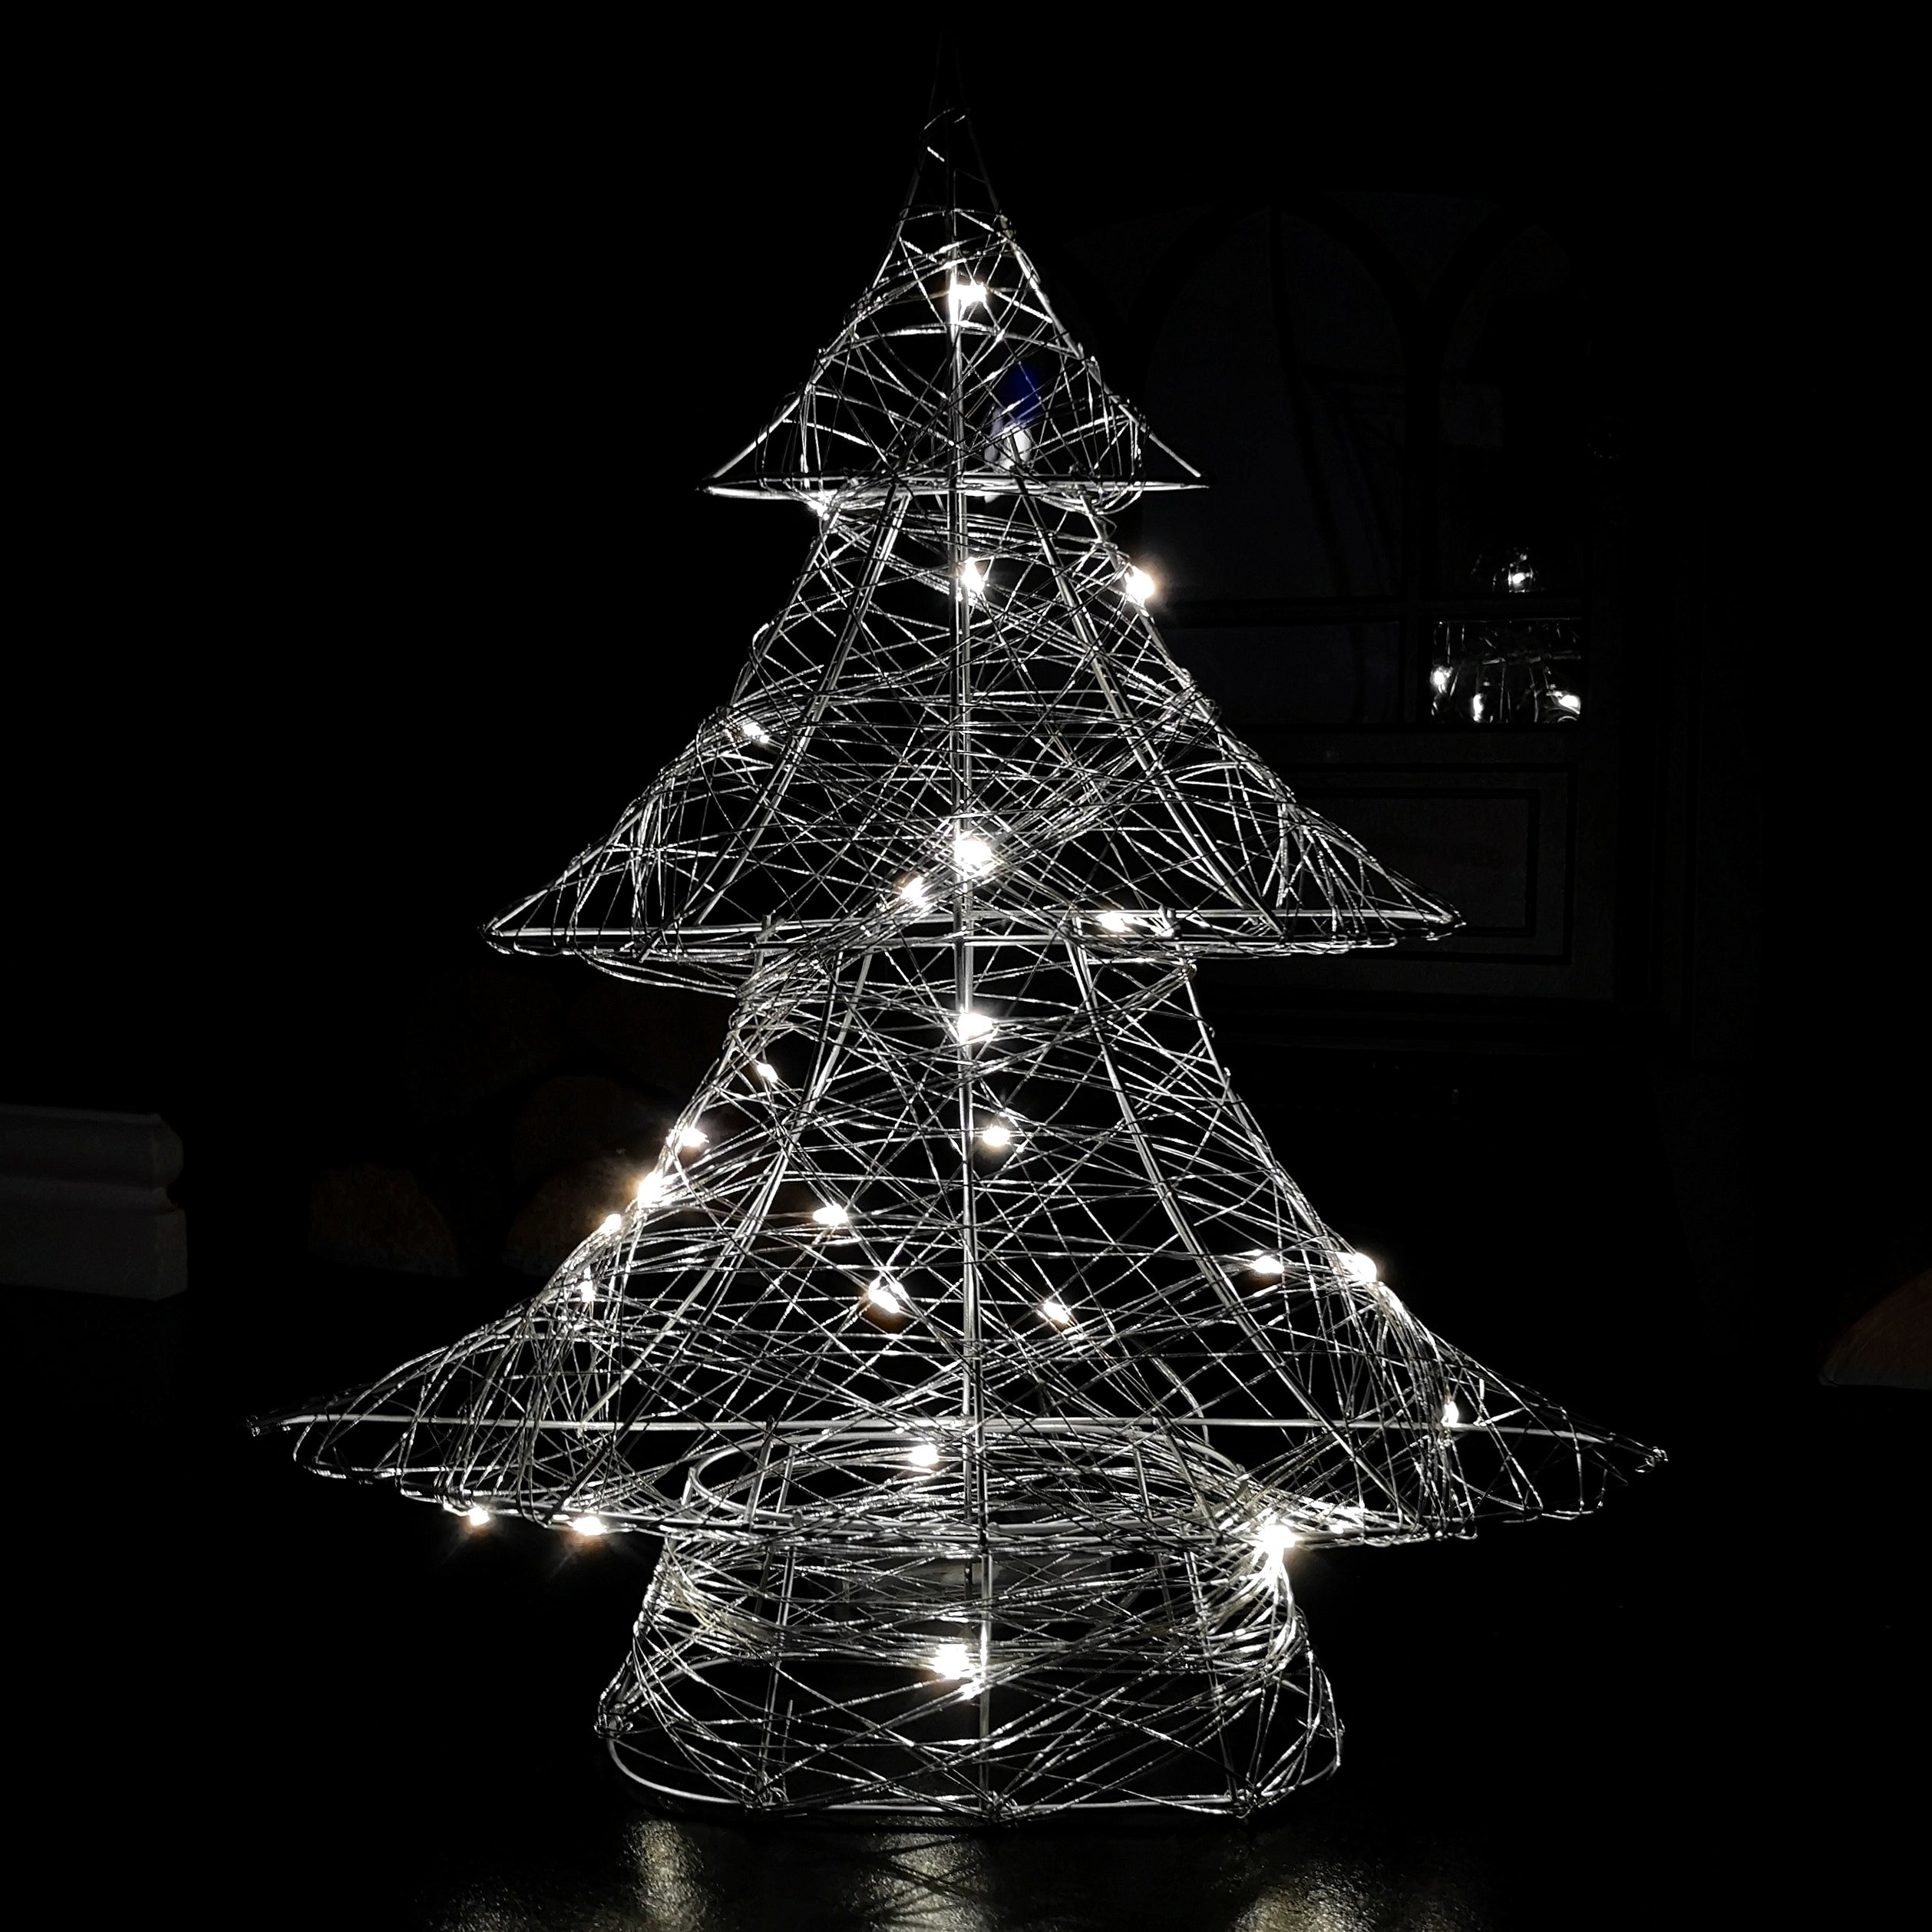 40cm Battery Operated Silver Woven Mesh Christmas Tree with Warm White LEDs